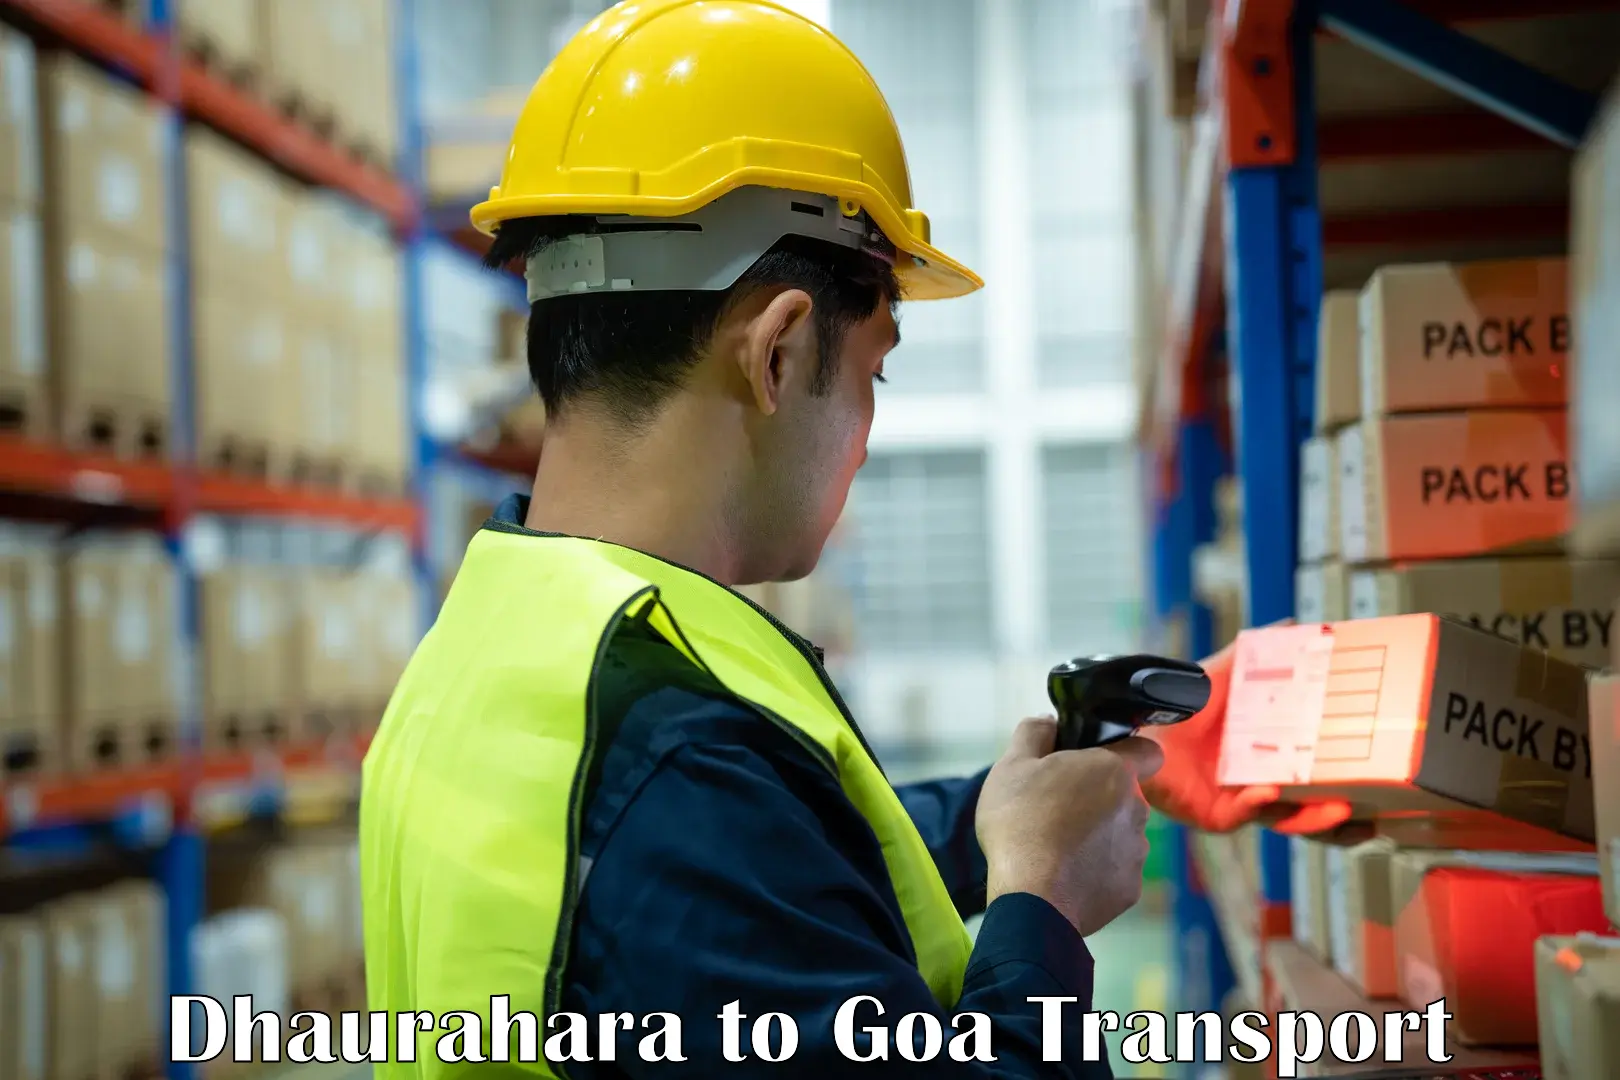 Shipping services in Dhaurahara to Bardez